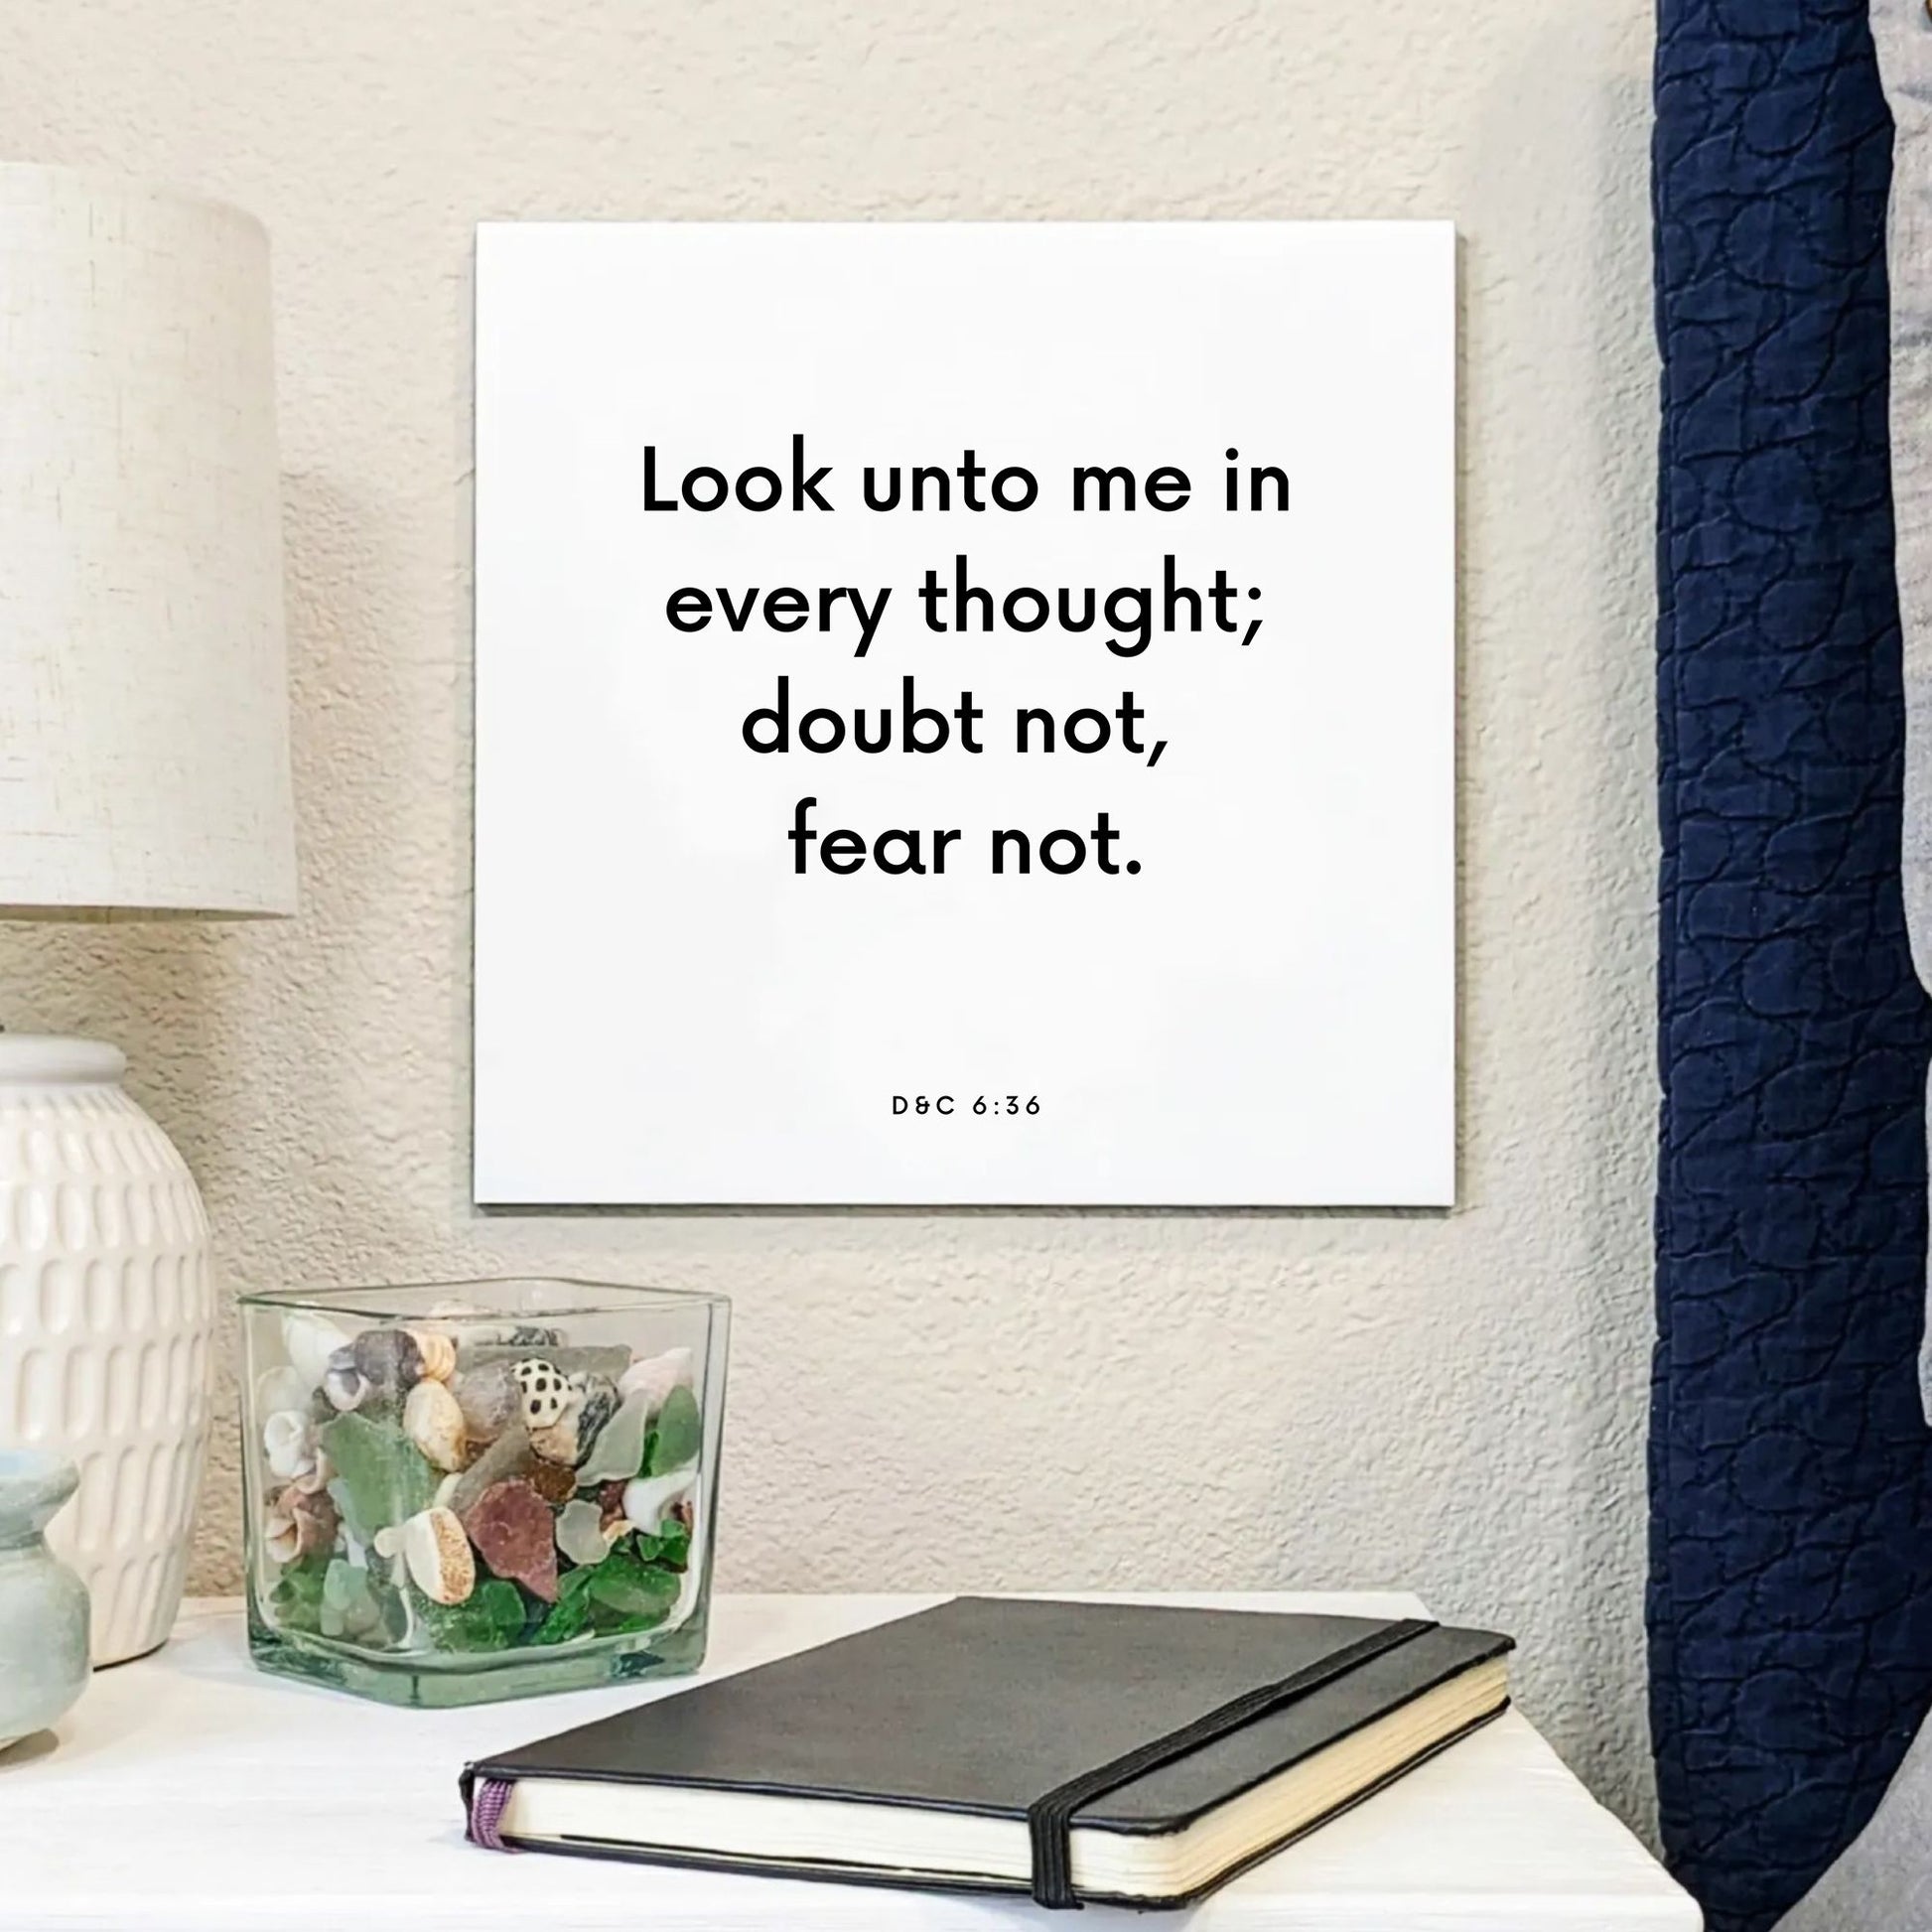 Bedside mouting of the scripture tile for D&C 6:36 - "Look unto me in every thought; doubt not, fear not"